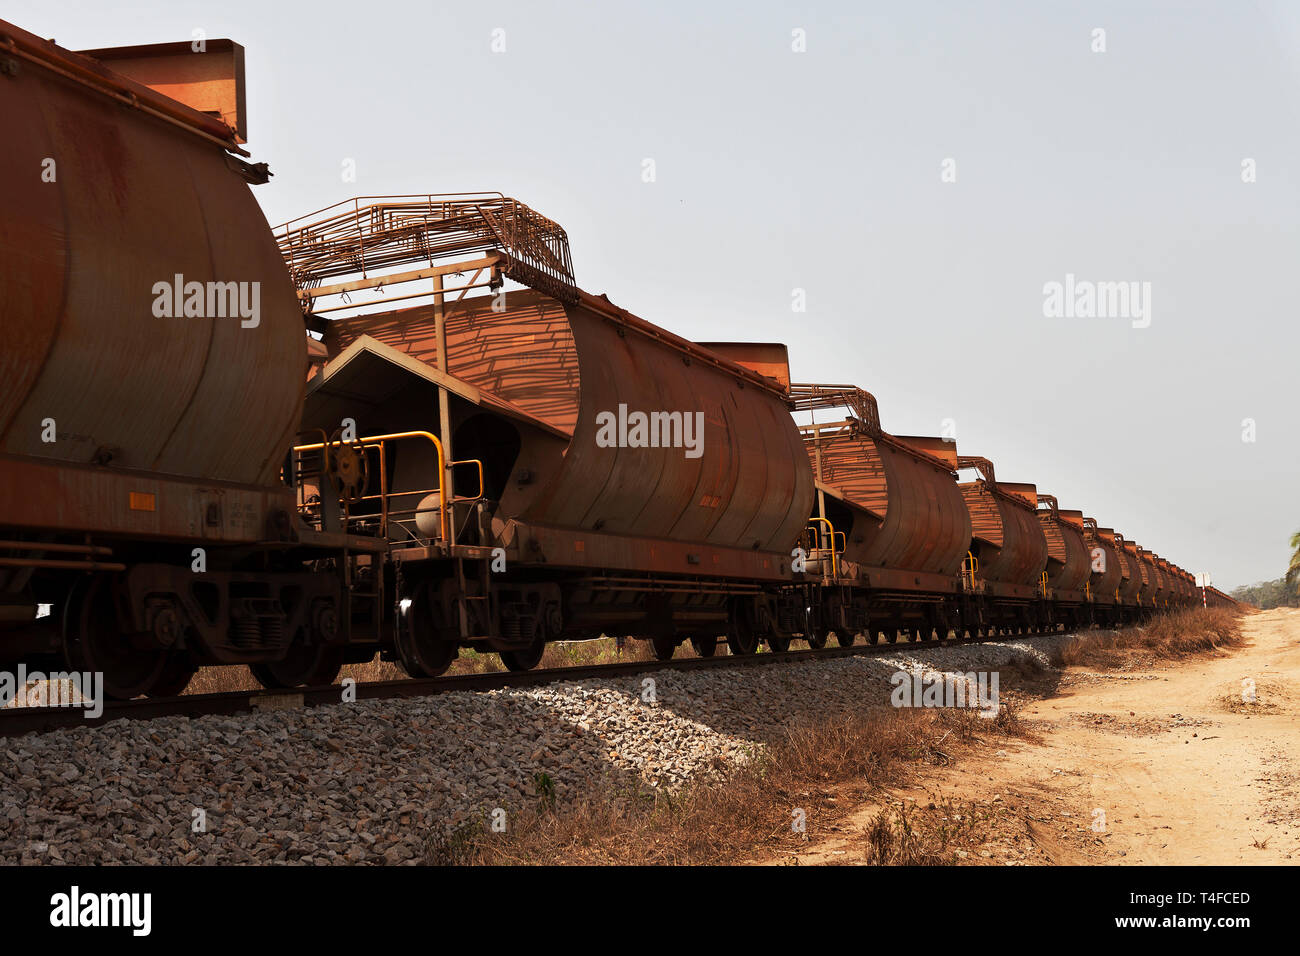 Port operations for managing and transporting iron ore. Railway wagons near port area carrying iron ore before loading onto ships for overseas markets Stock Photo